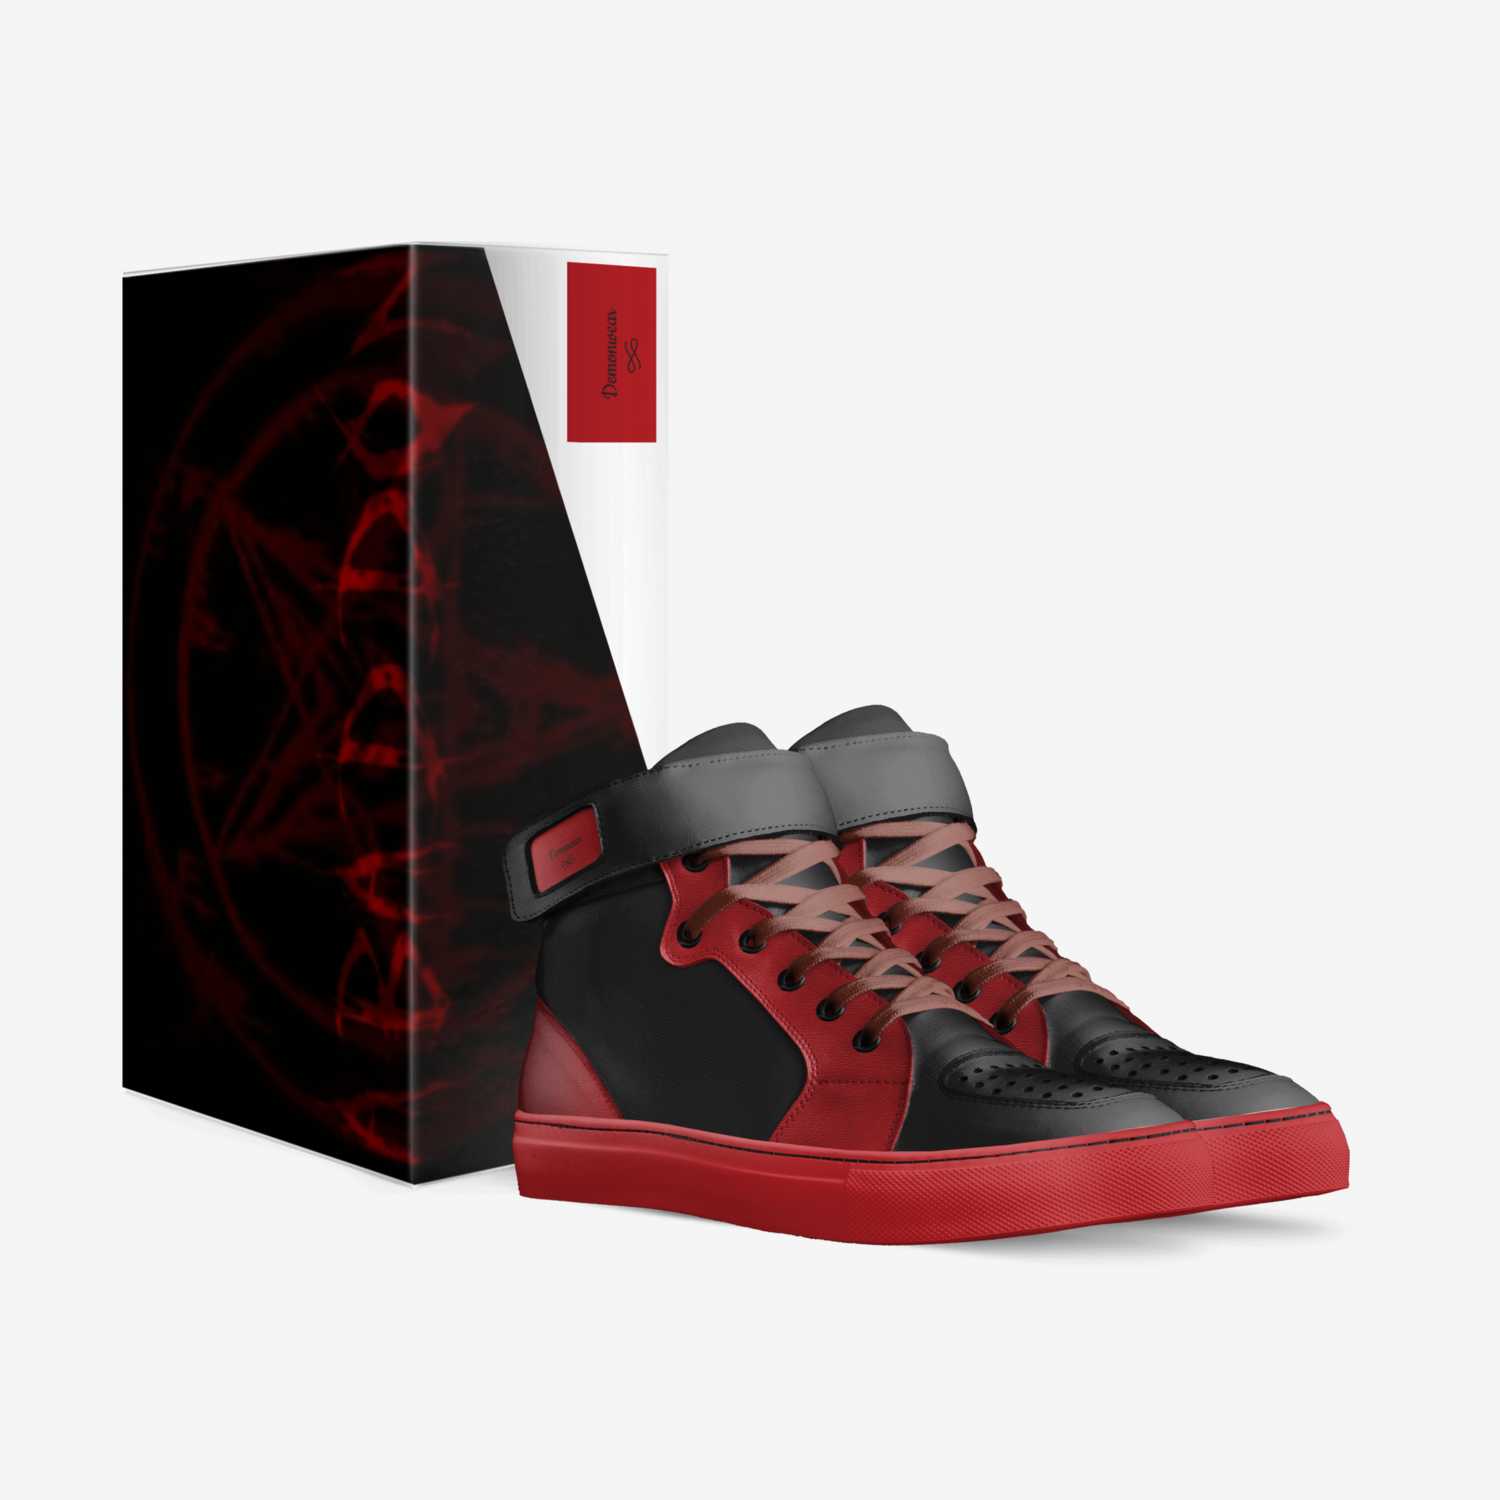 Demonwear custom made in Italy shoes by Abaddon | Box view